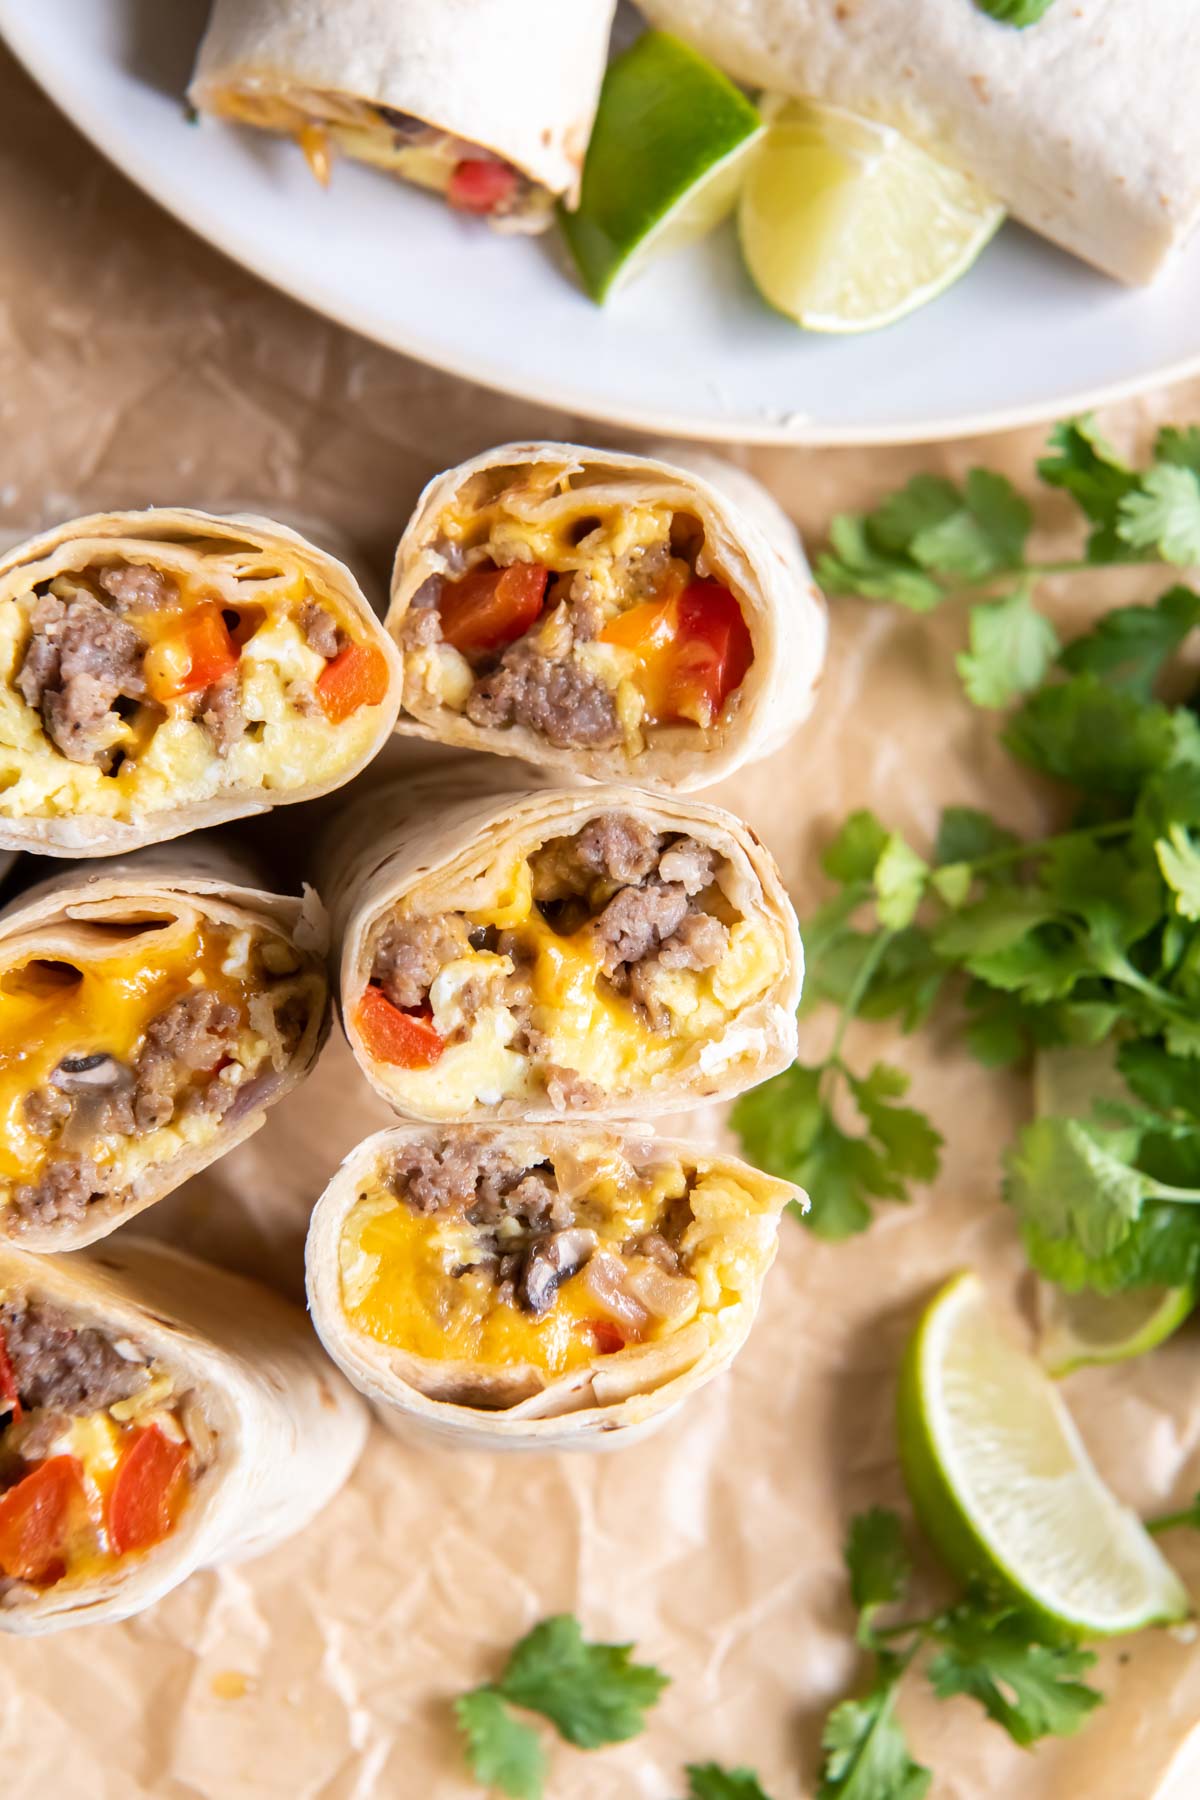 Breakfast burritos with sausage, eggs, veggies and cheese cut in half and standing up so you can see the filling.